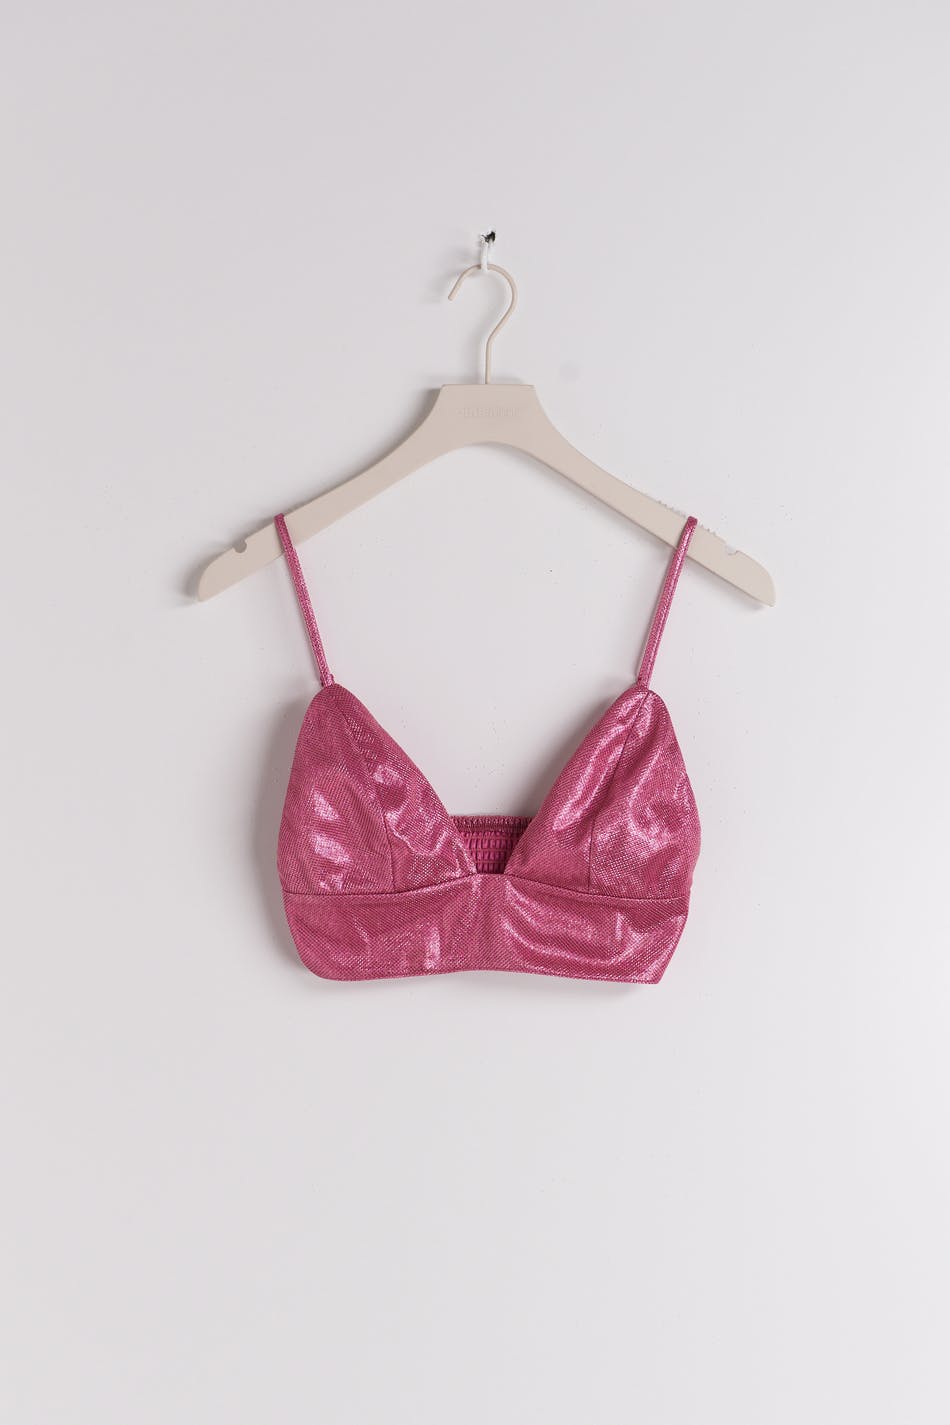 Gina Tricot BRALETTE - Top - pink 